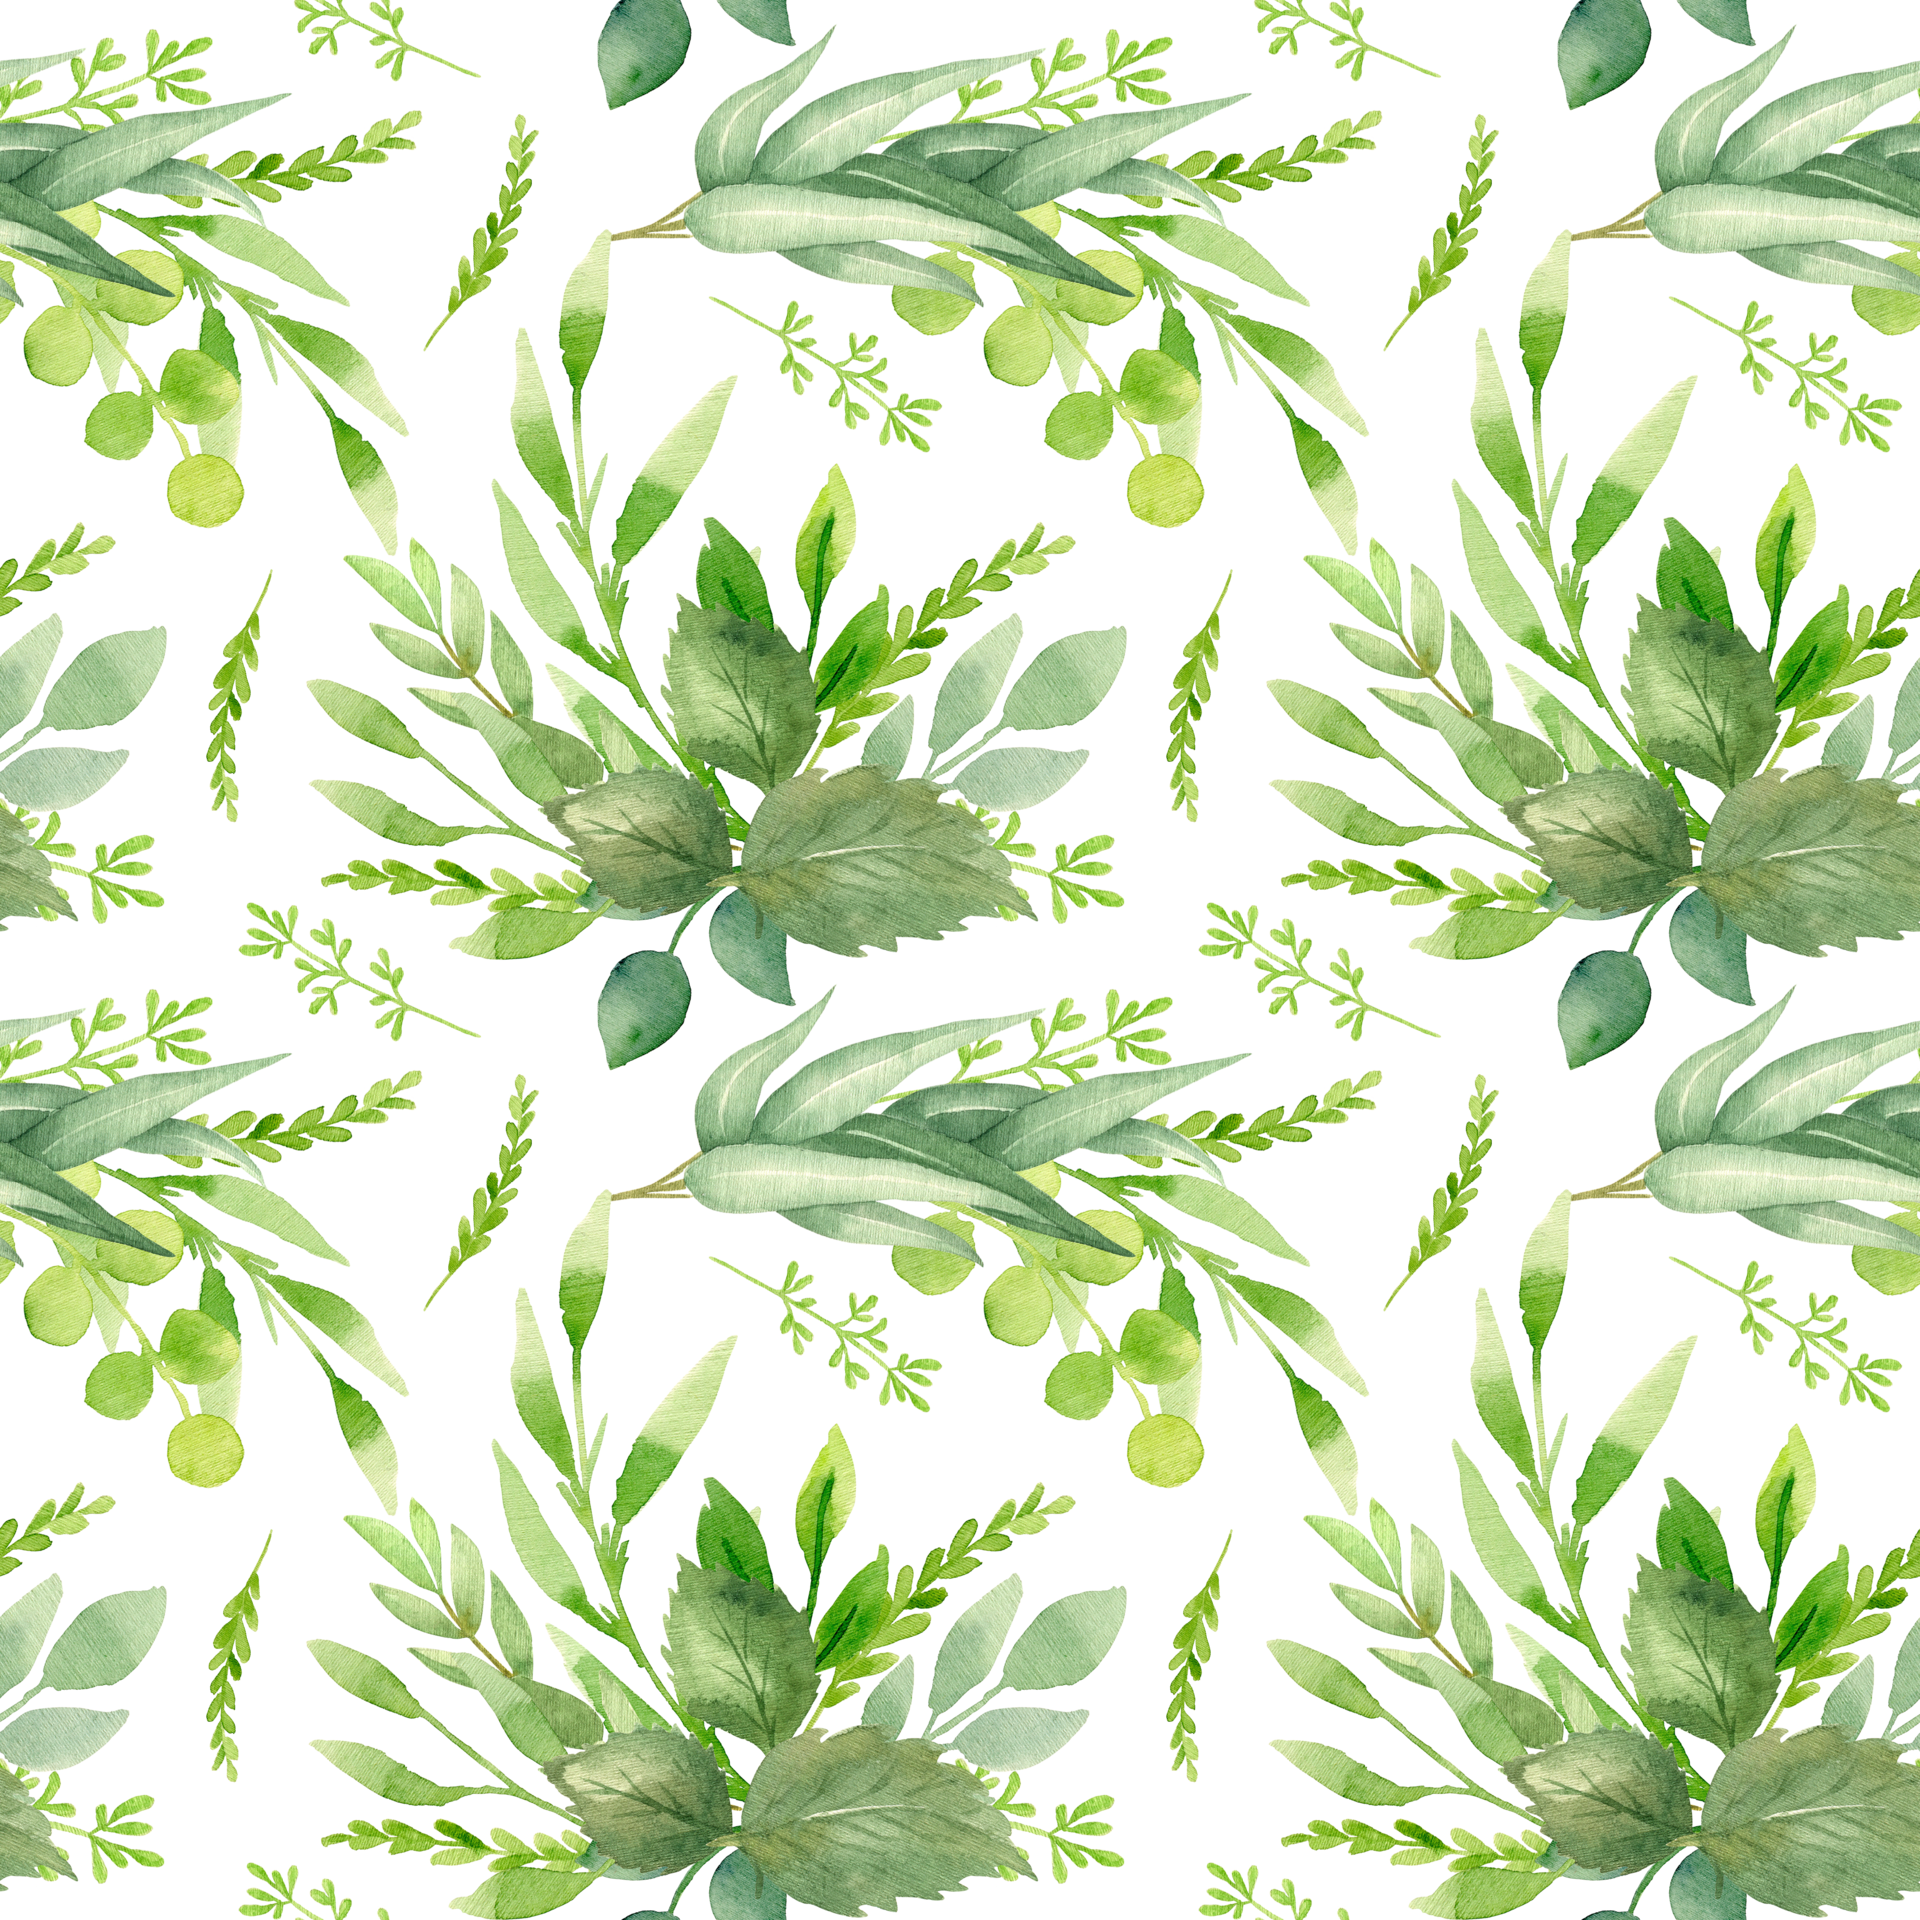 Watercolor seamless cozy pattern with dry and green leaves. Spring